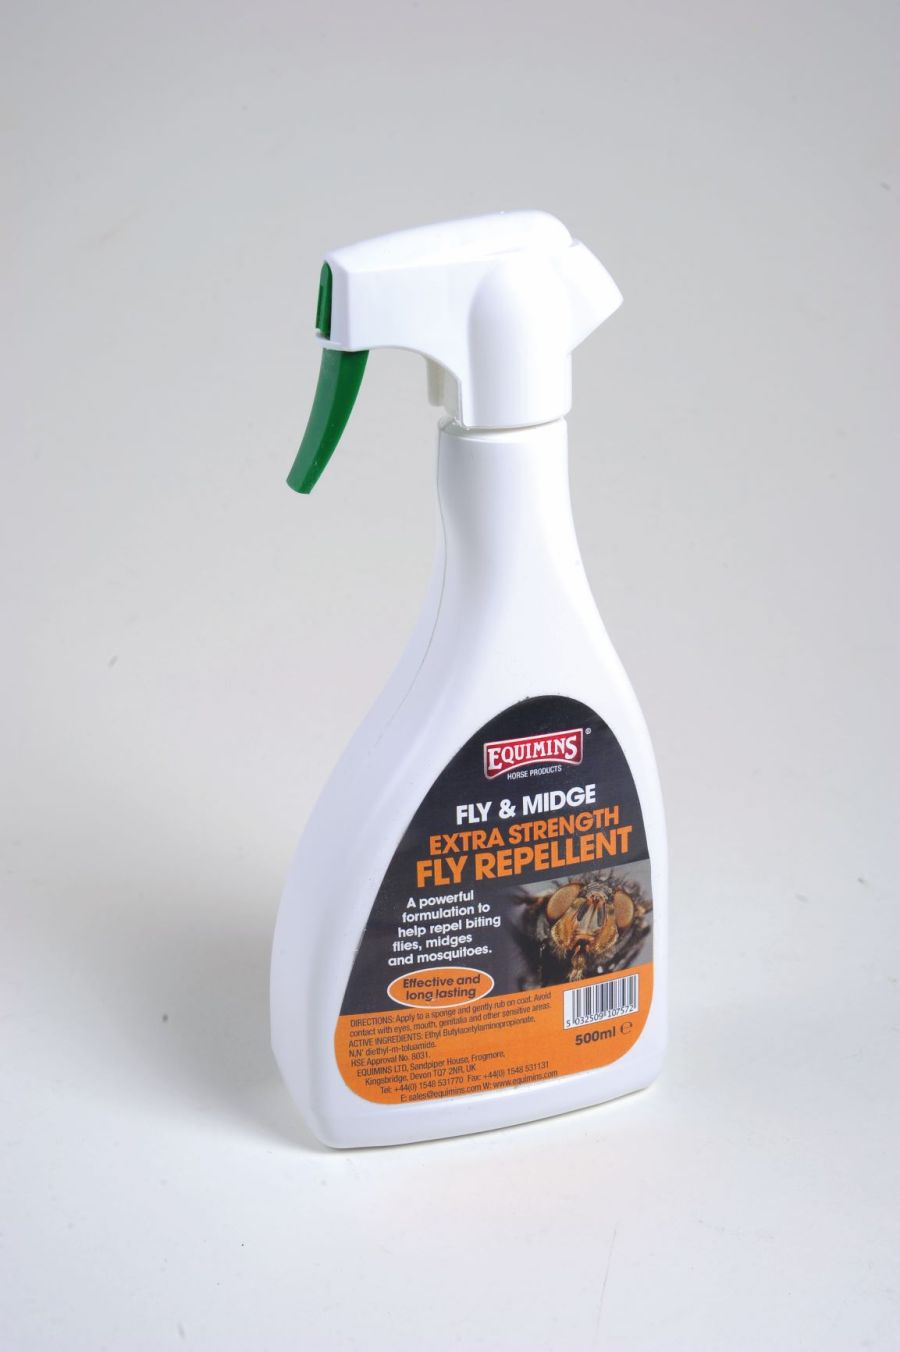 A spray bottle of Equimins Fly Repellent Extra Strength is shown